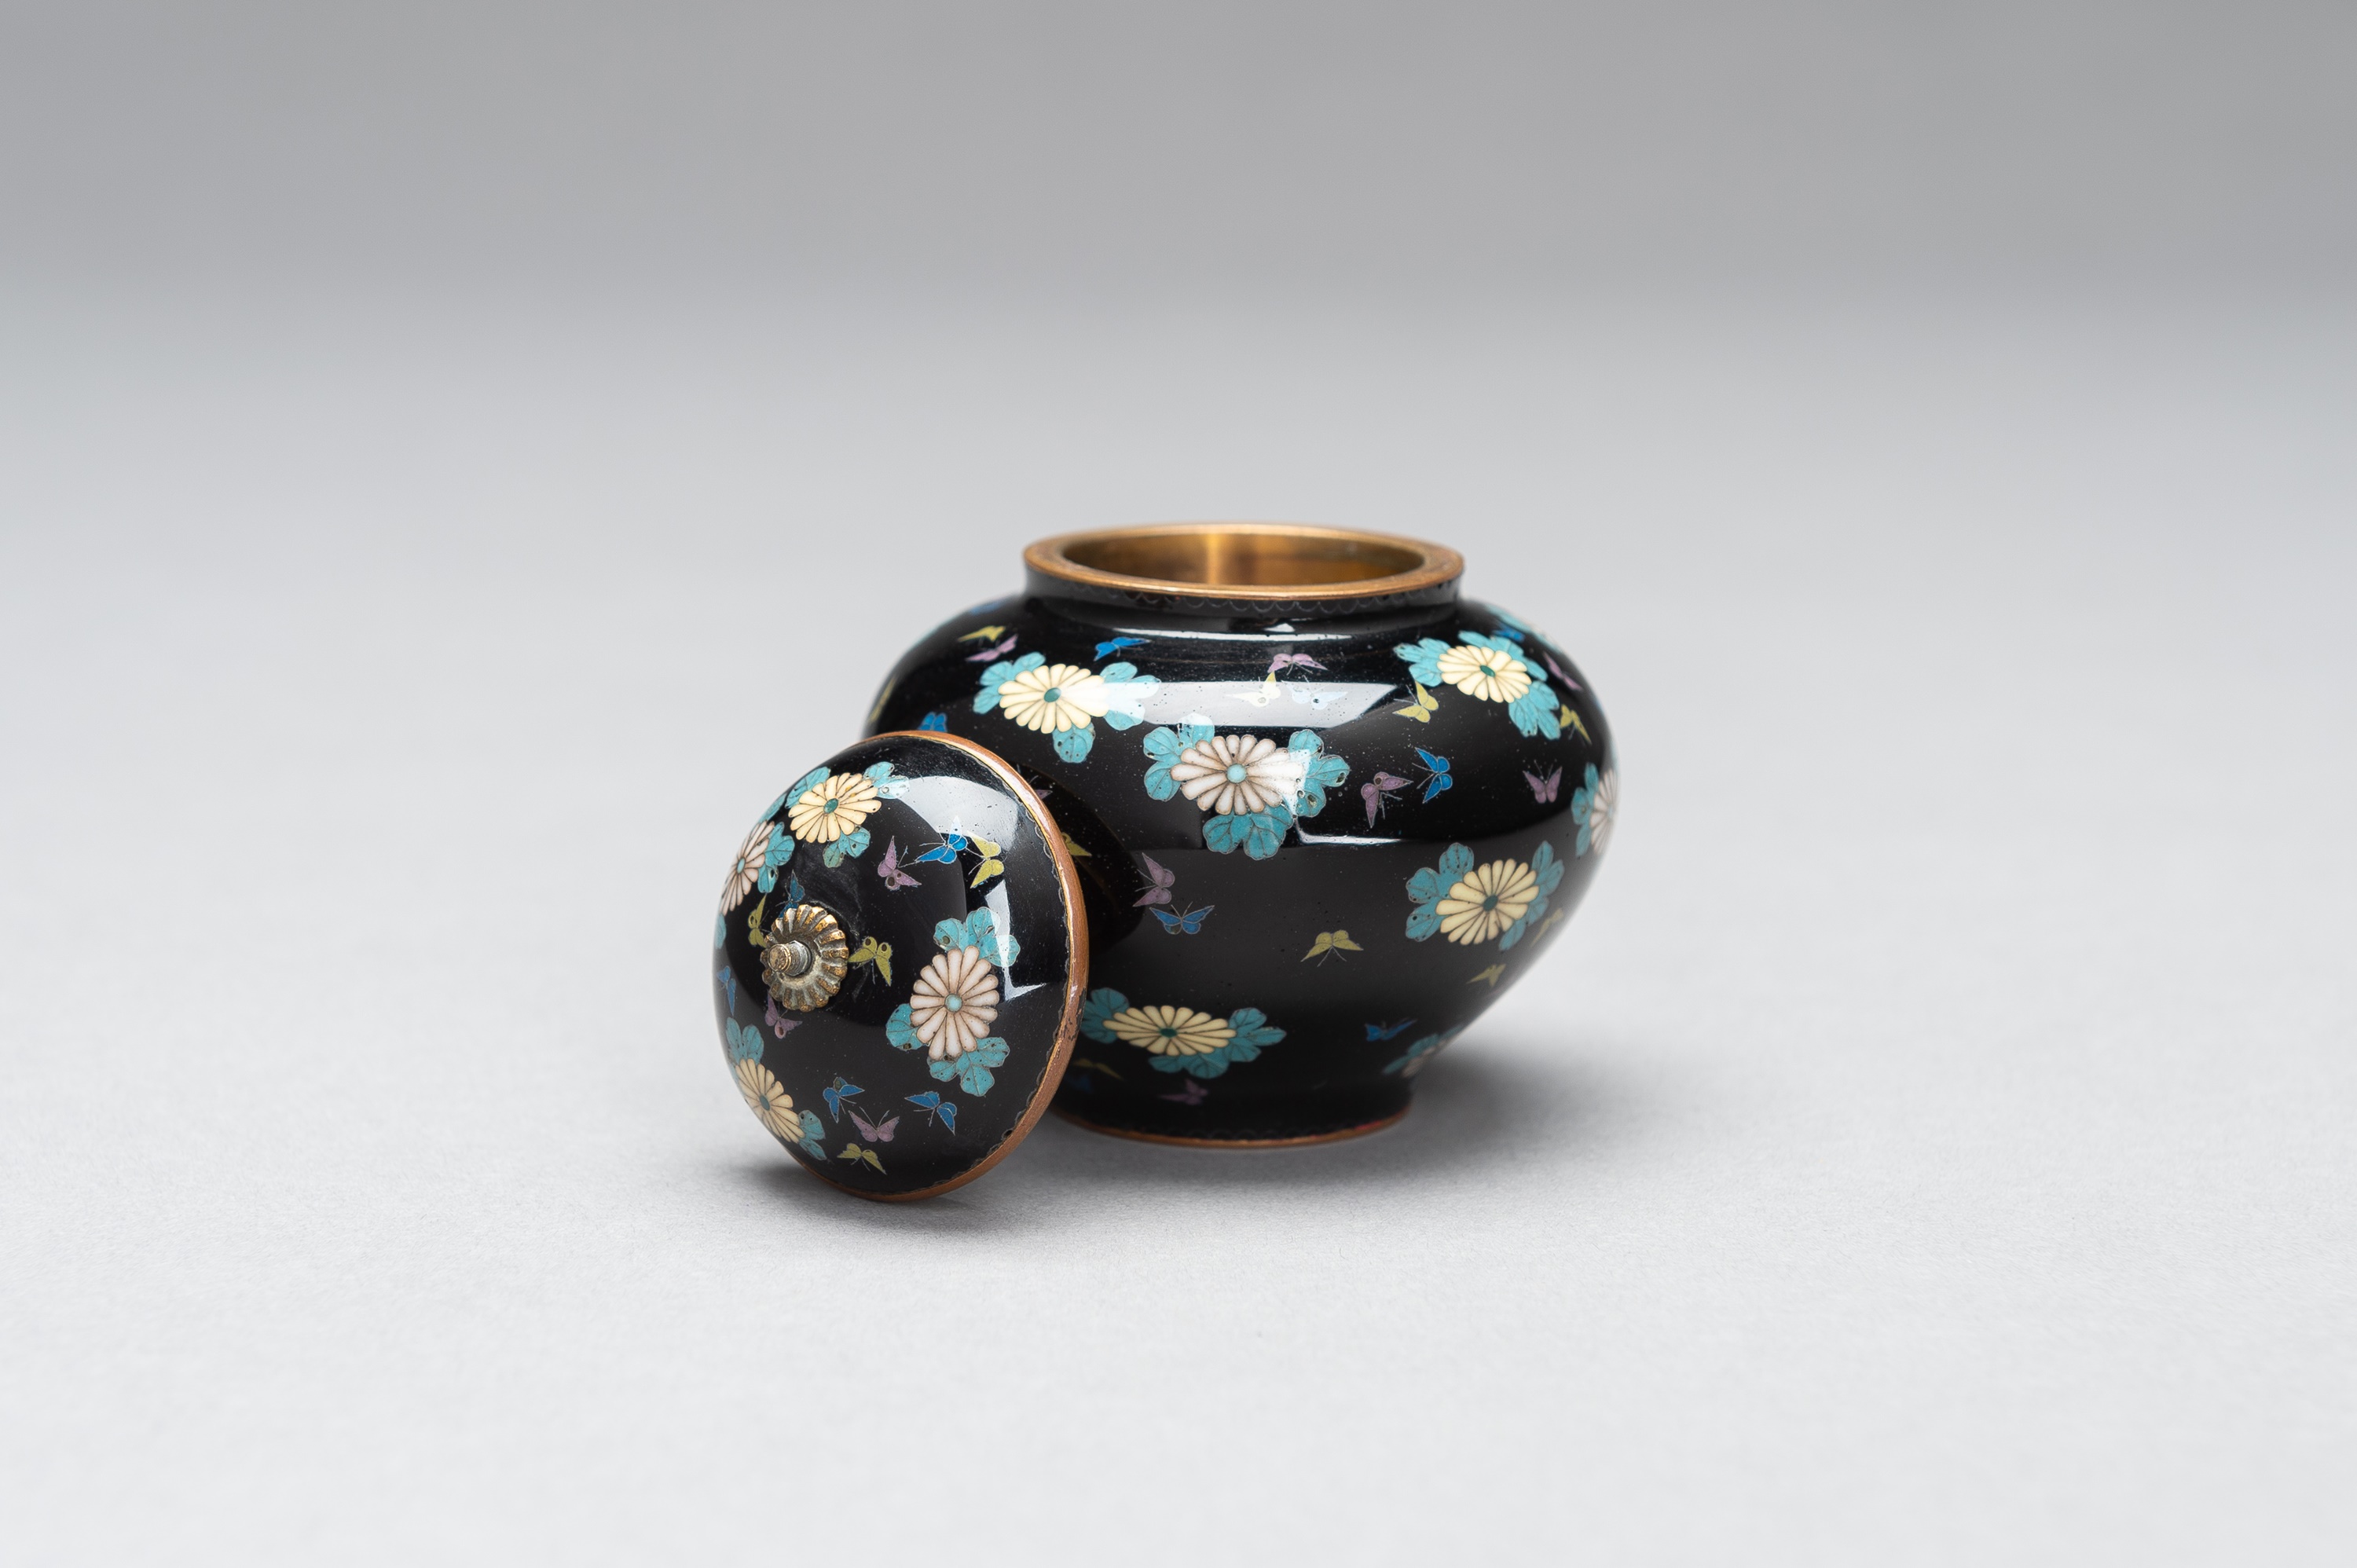 A CLOISONNE ENAMEL MINIATURE VASE WITH COVER - Image 7 of 9